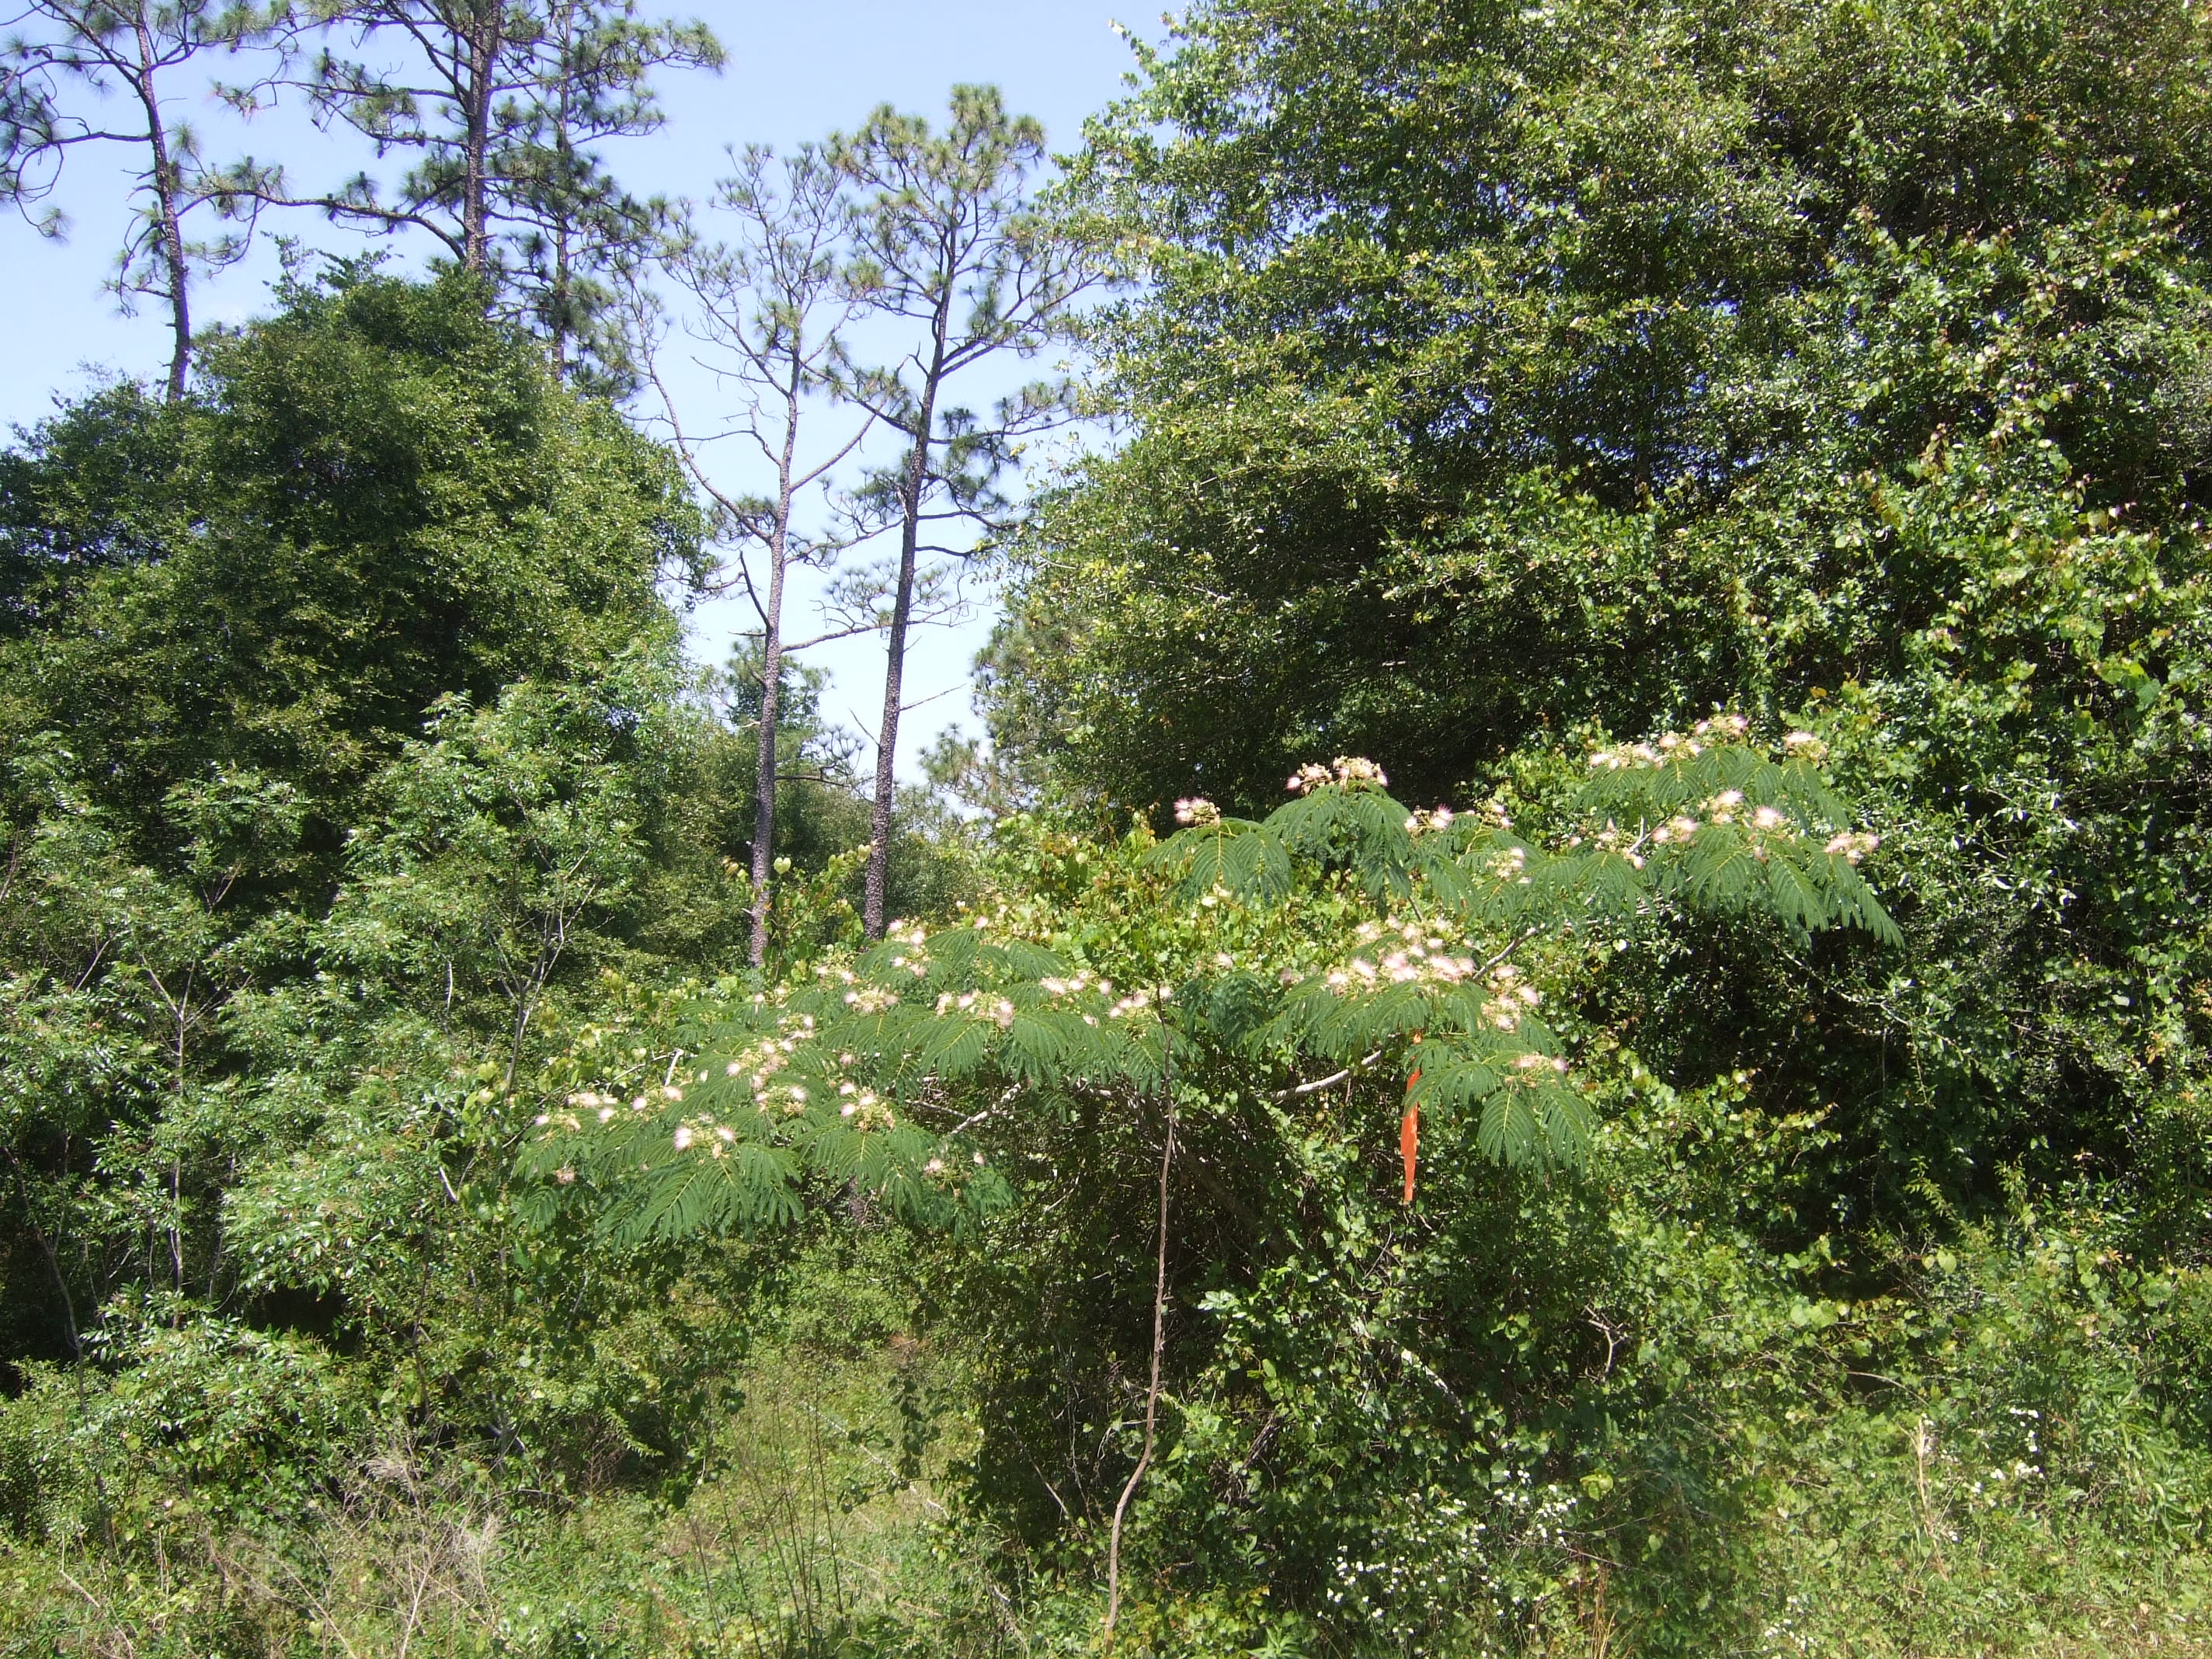 Mimosa exhibiting typical growth form.